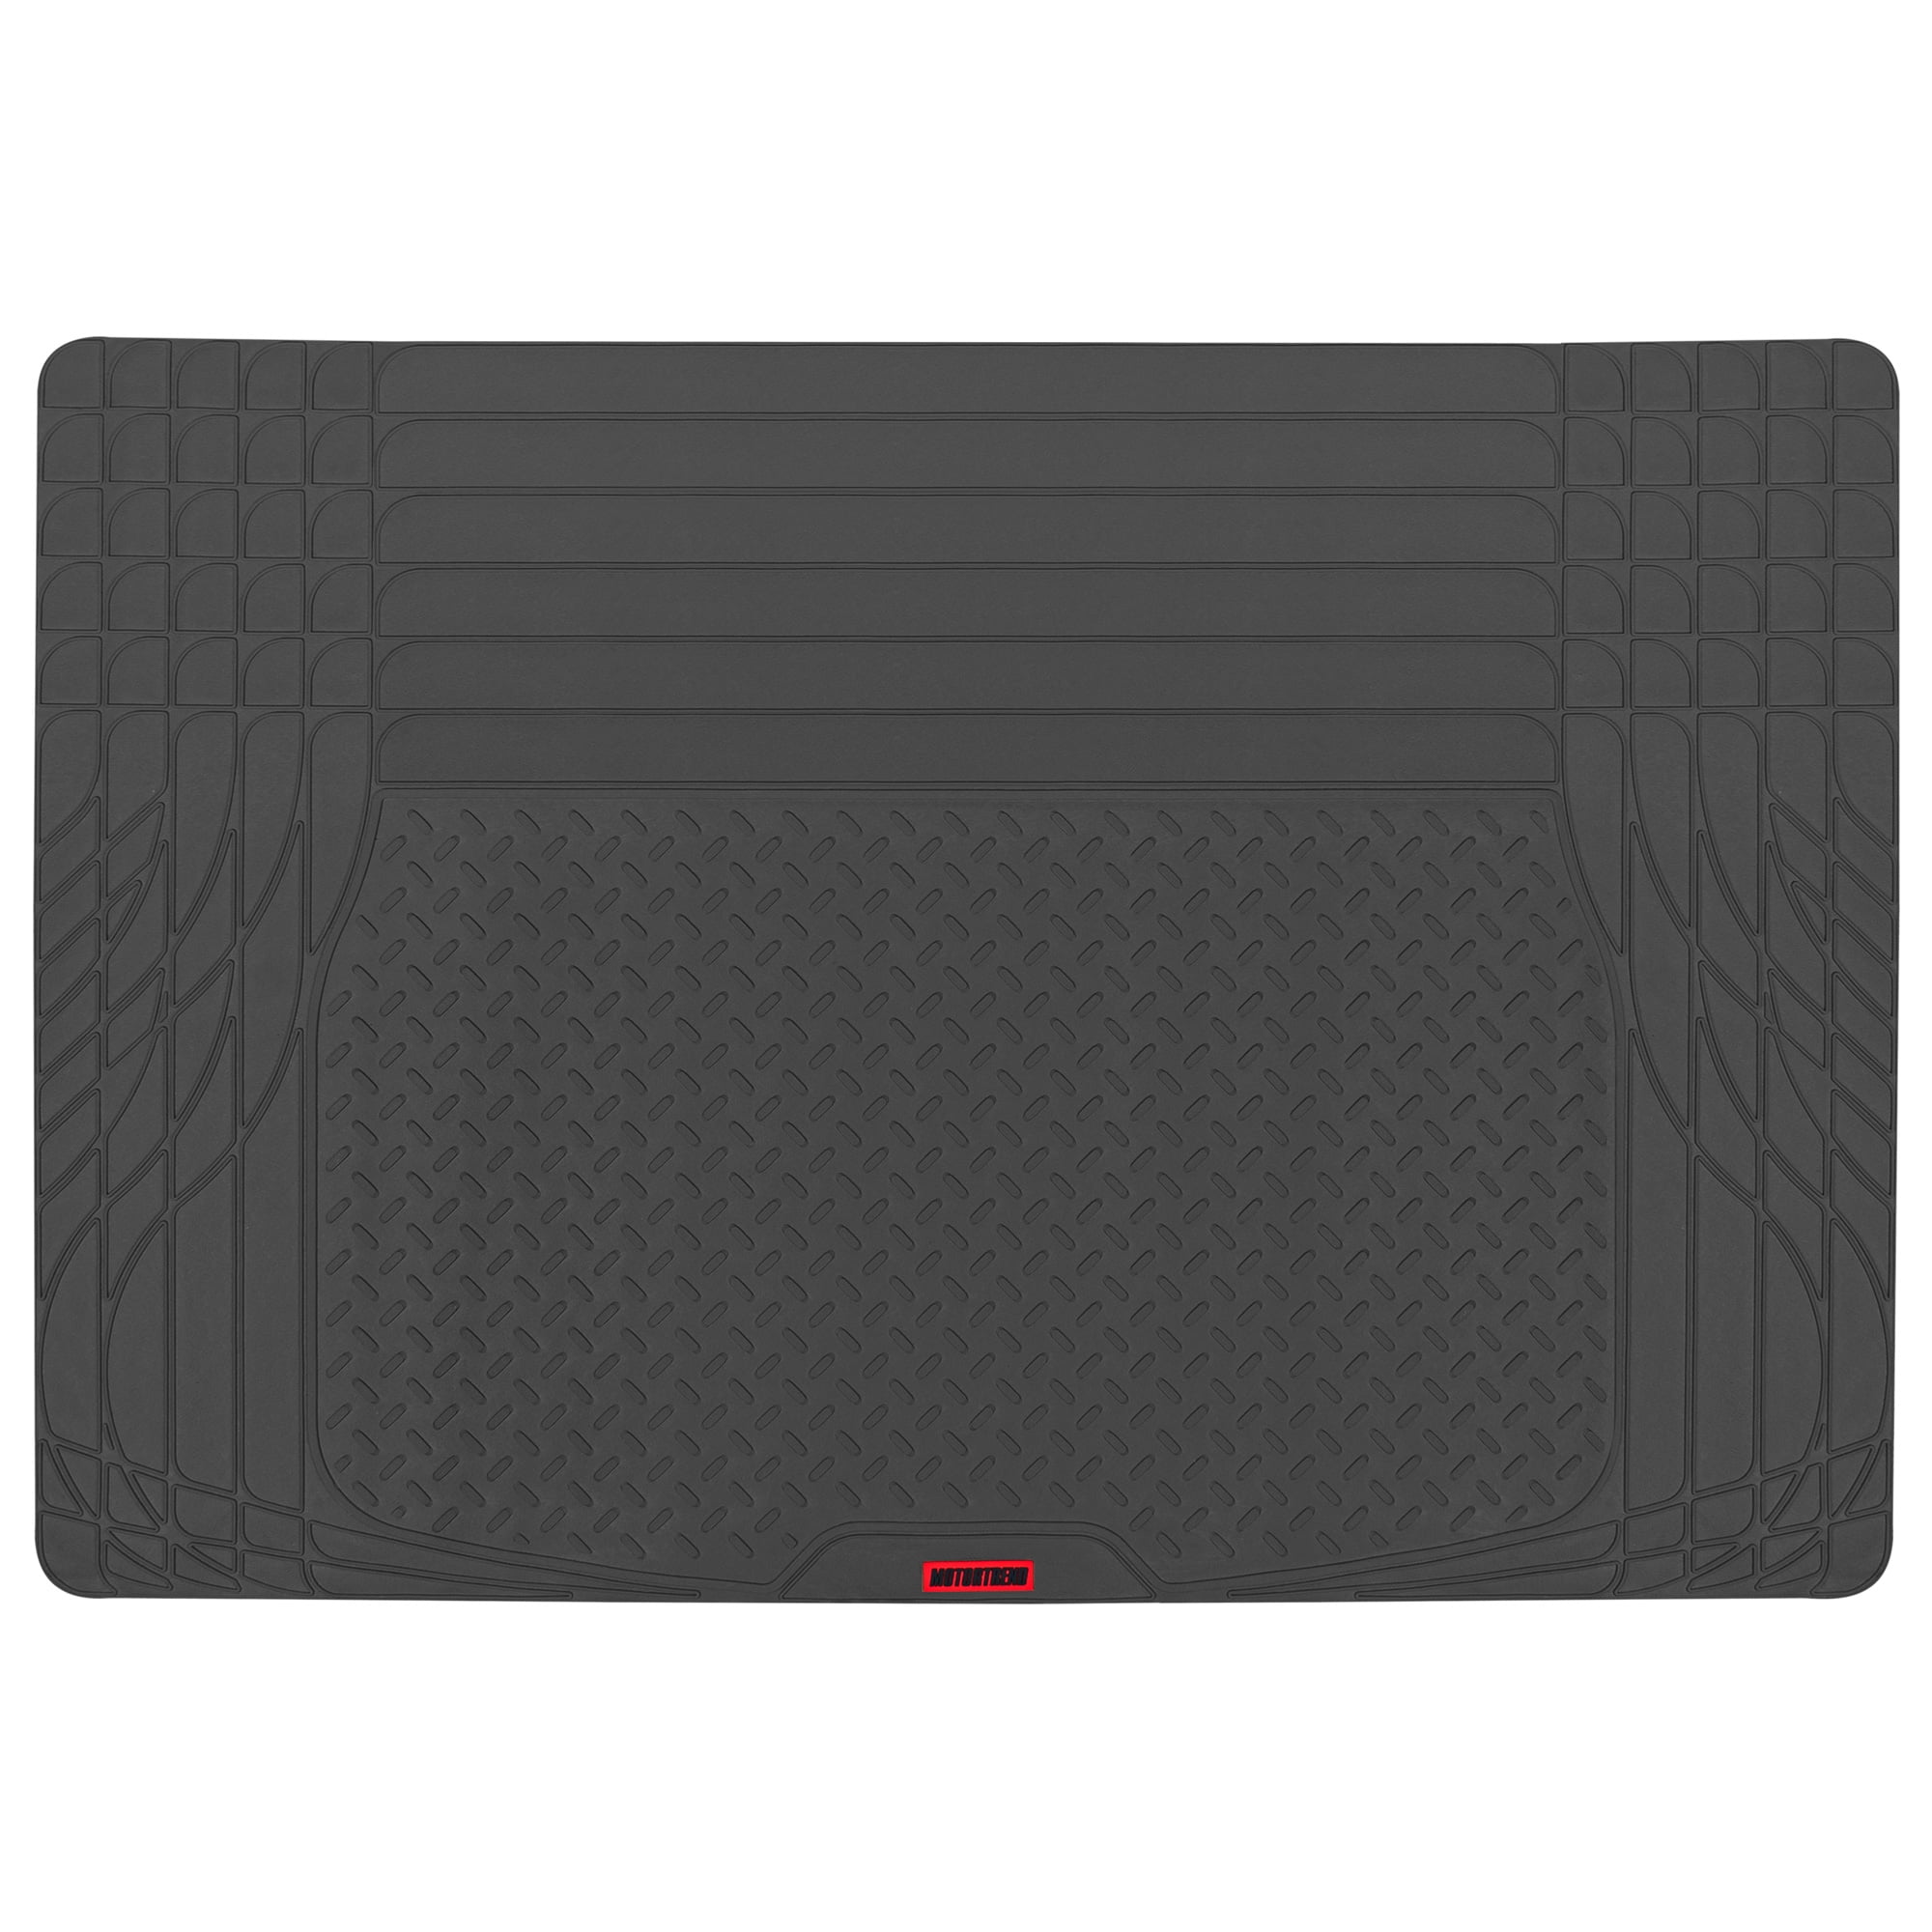 MotorTrend FlexTough TrunkShield Car Mat for Back of SUV, Sedan  Coupe  Trunk Cargo Liner Cover, All Weather Heavy Duty Protection, Universal  Trim-To-Fit, 47.5